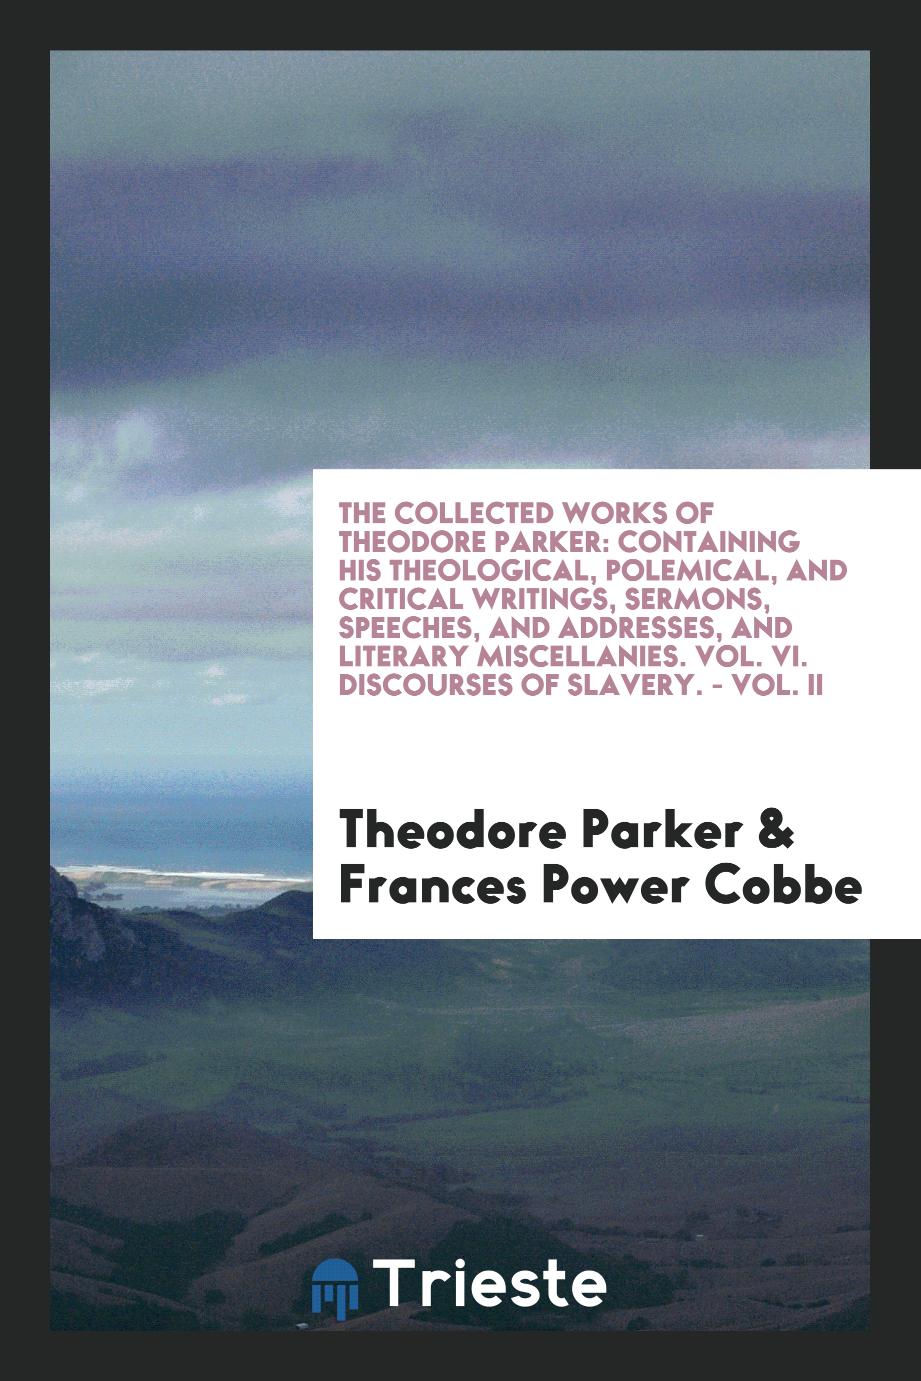 The Collected Works of Theodore Parker: Containing His Theological, Polemical, and Critical Writings, Sermons, Speeches, and Addresses, and Literary Miscellanies. Vol. VI. Discourses of Slavery. - Vol. II